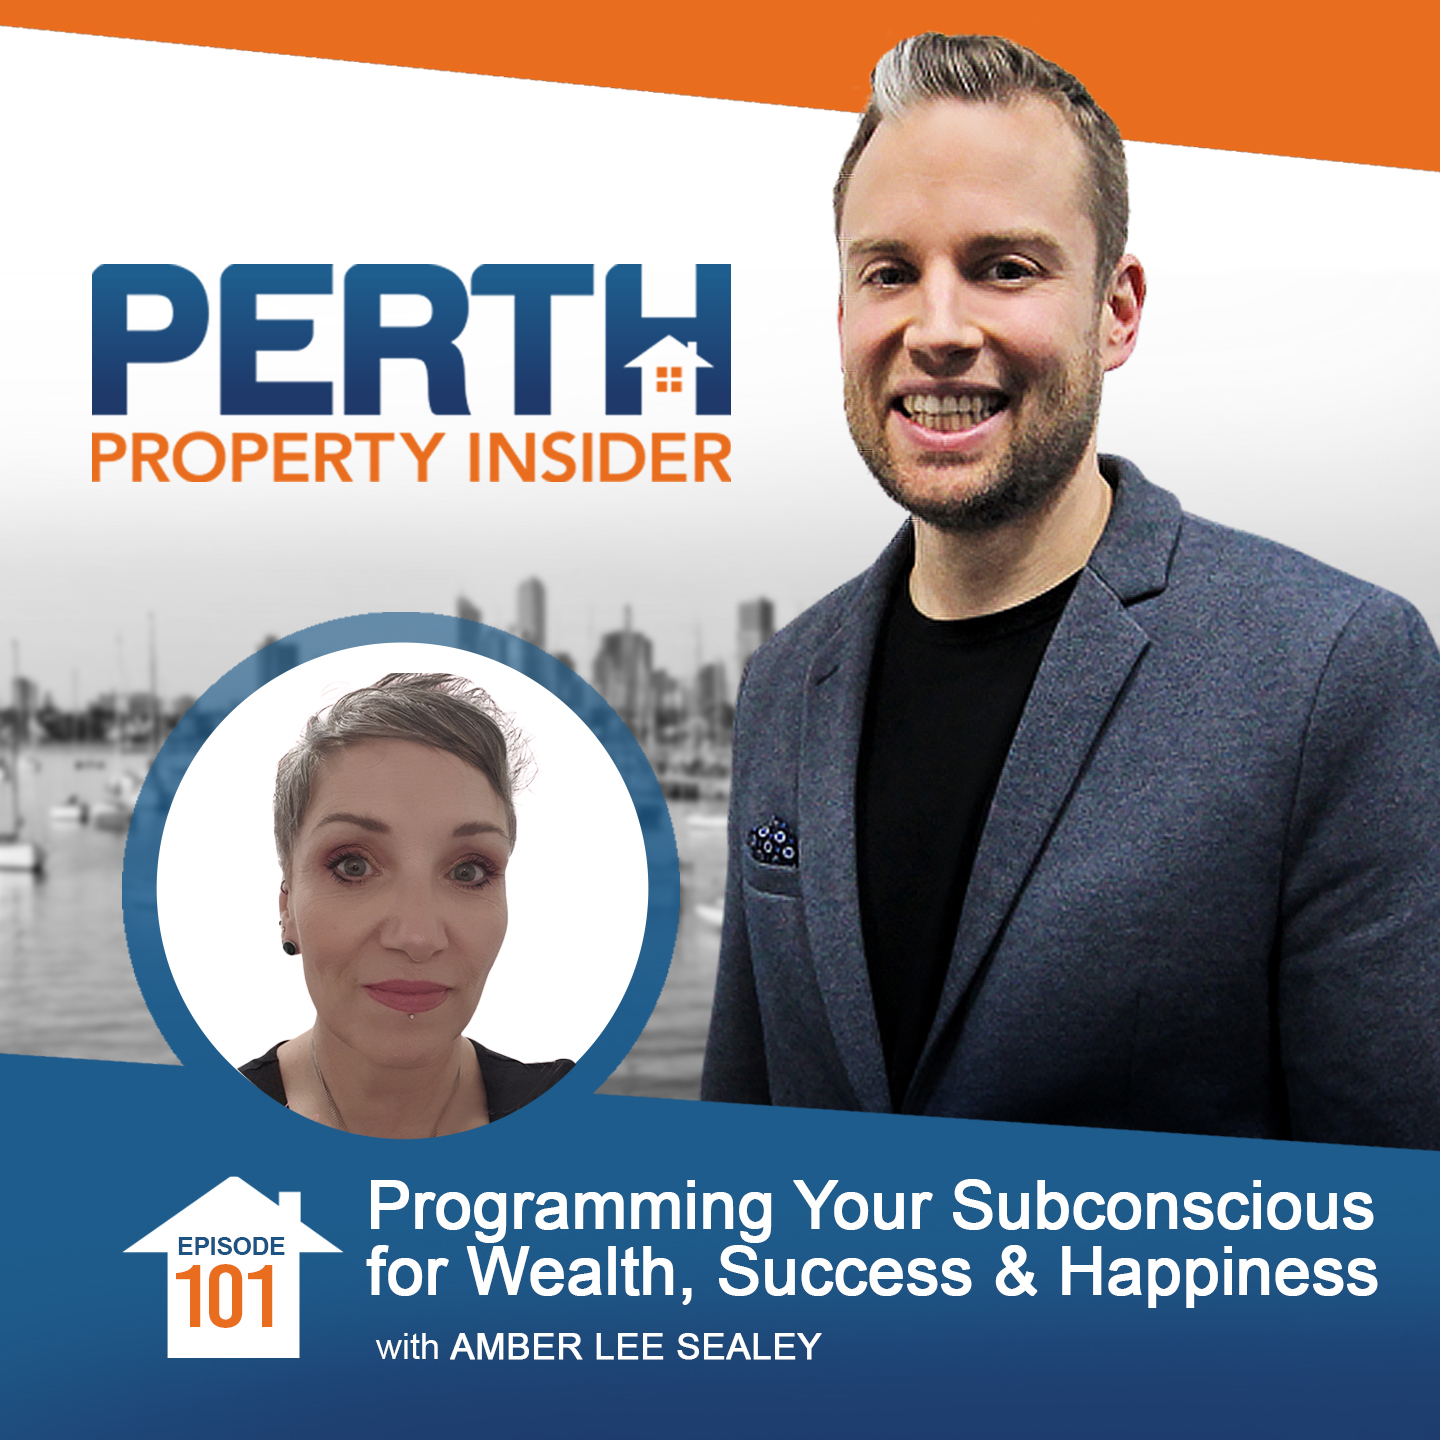 Programming Your Subconscious for Wealth, Success & Happiness With Amber Lee Sealey